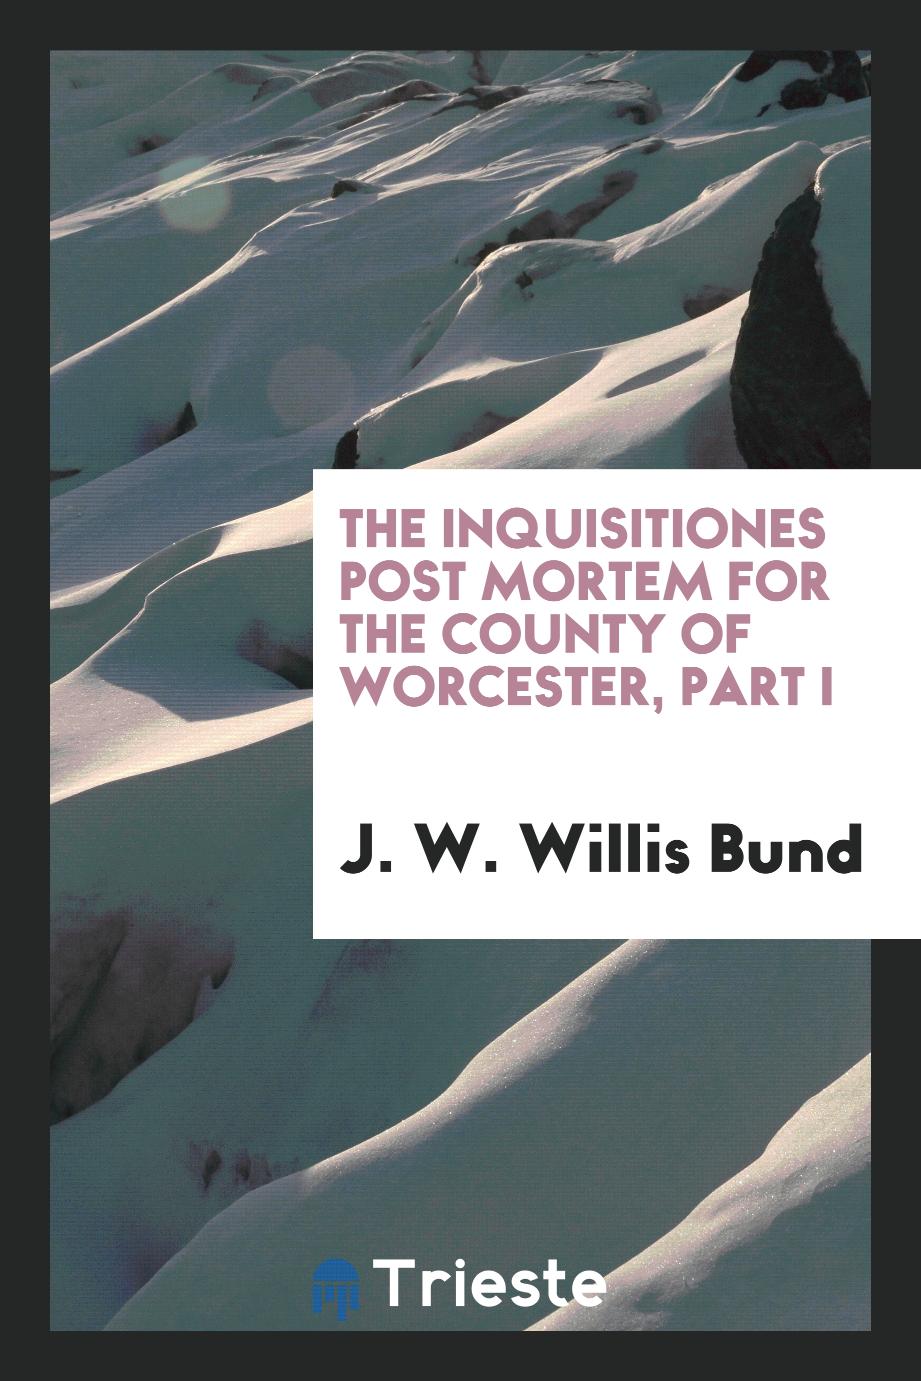 The Inquisitiones Post Mortem for the County of Worcester, Part I